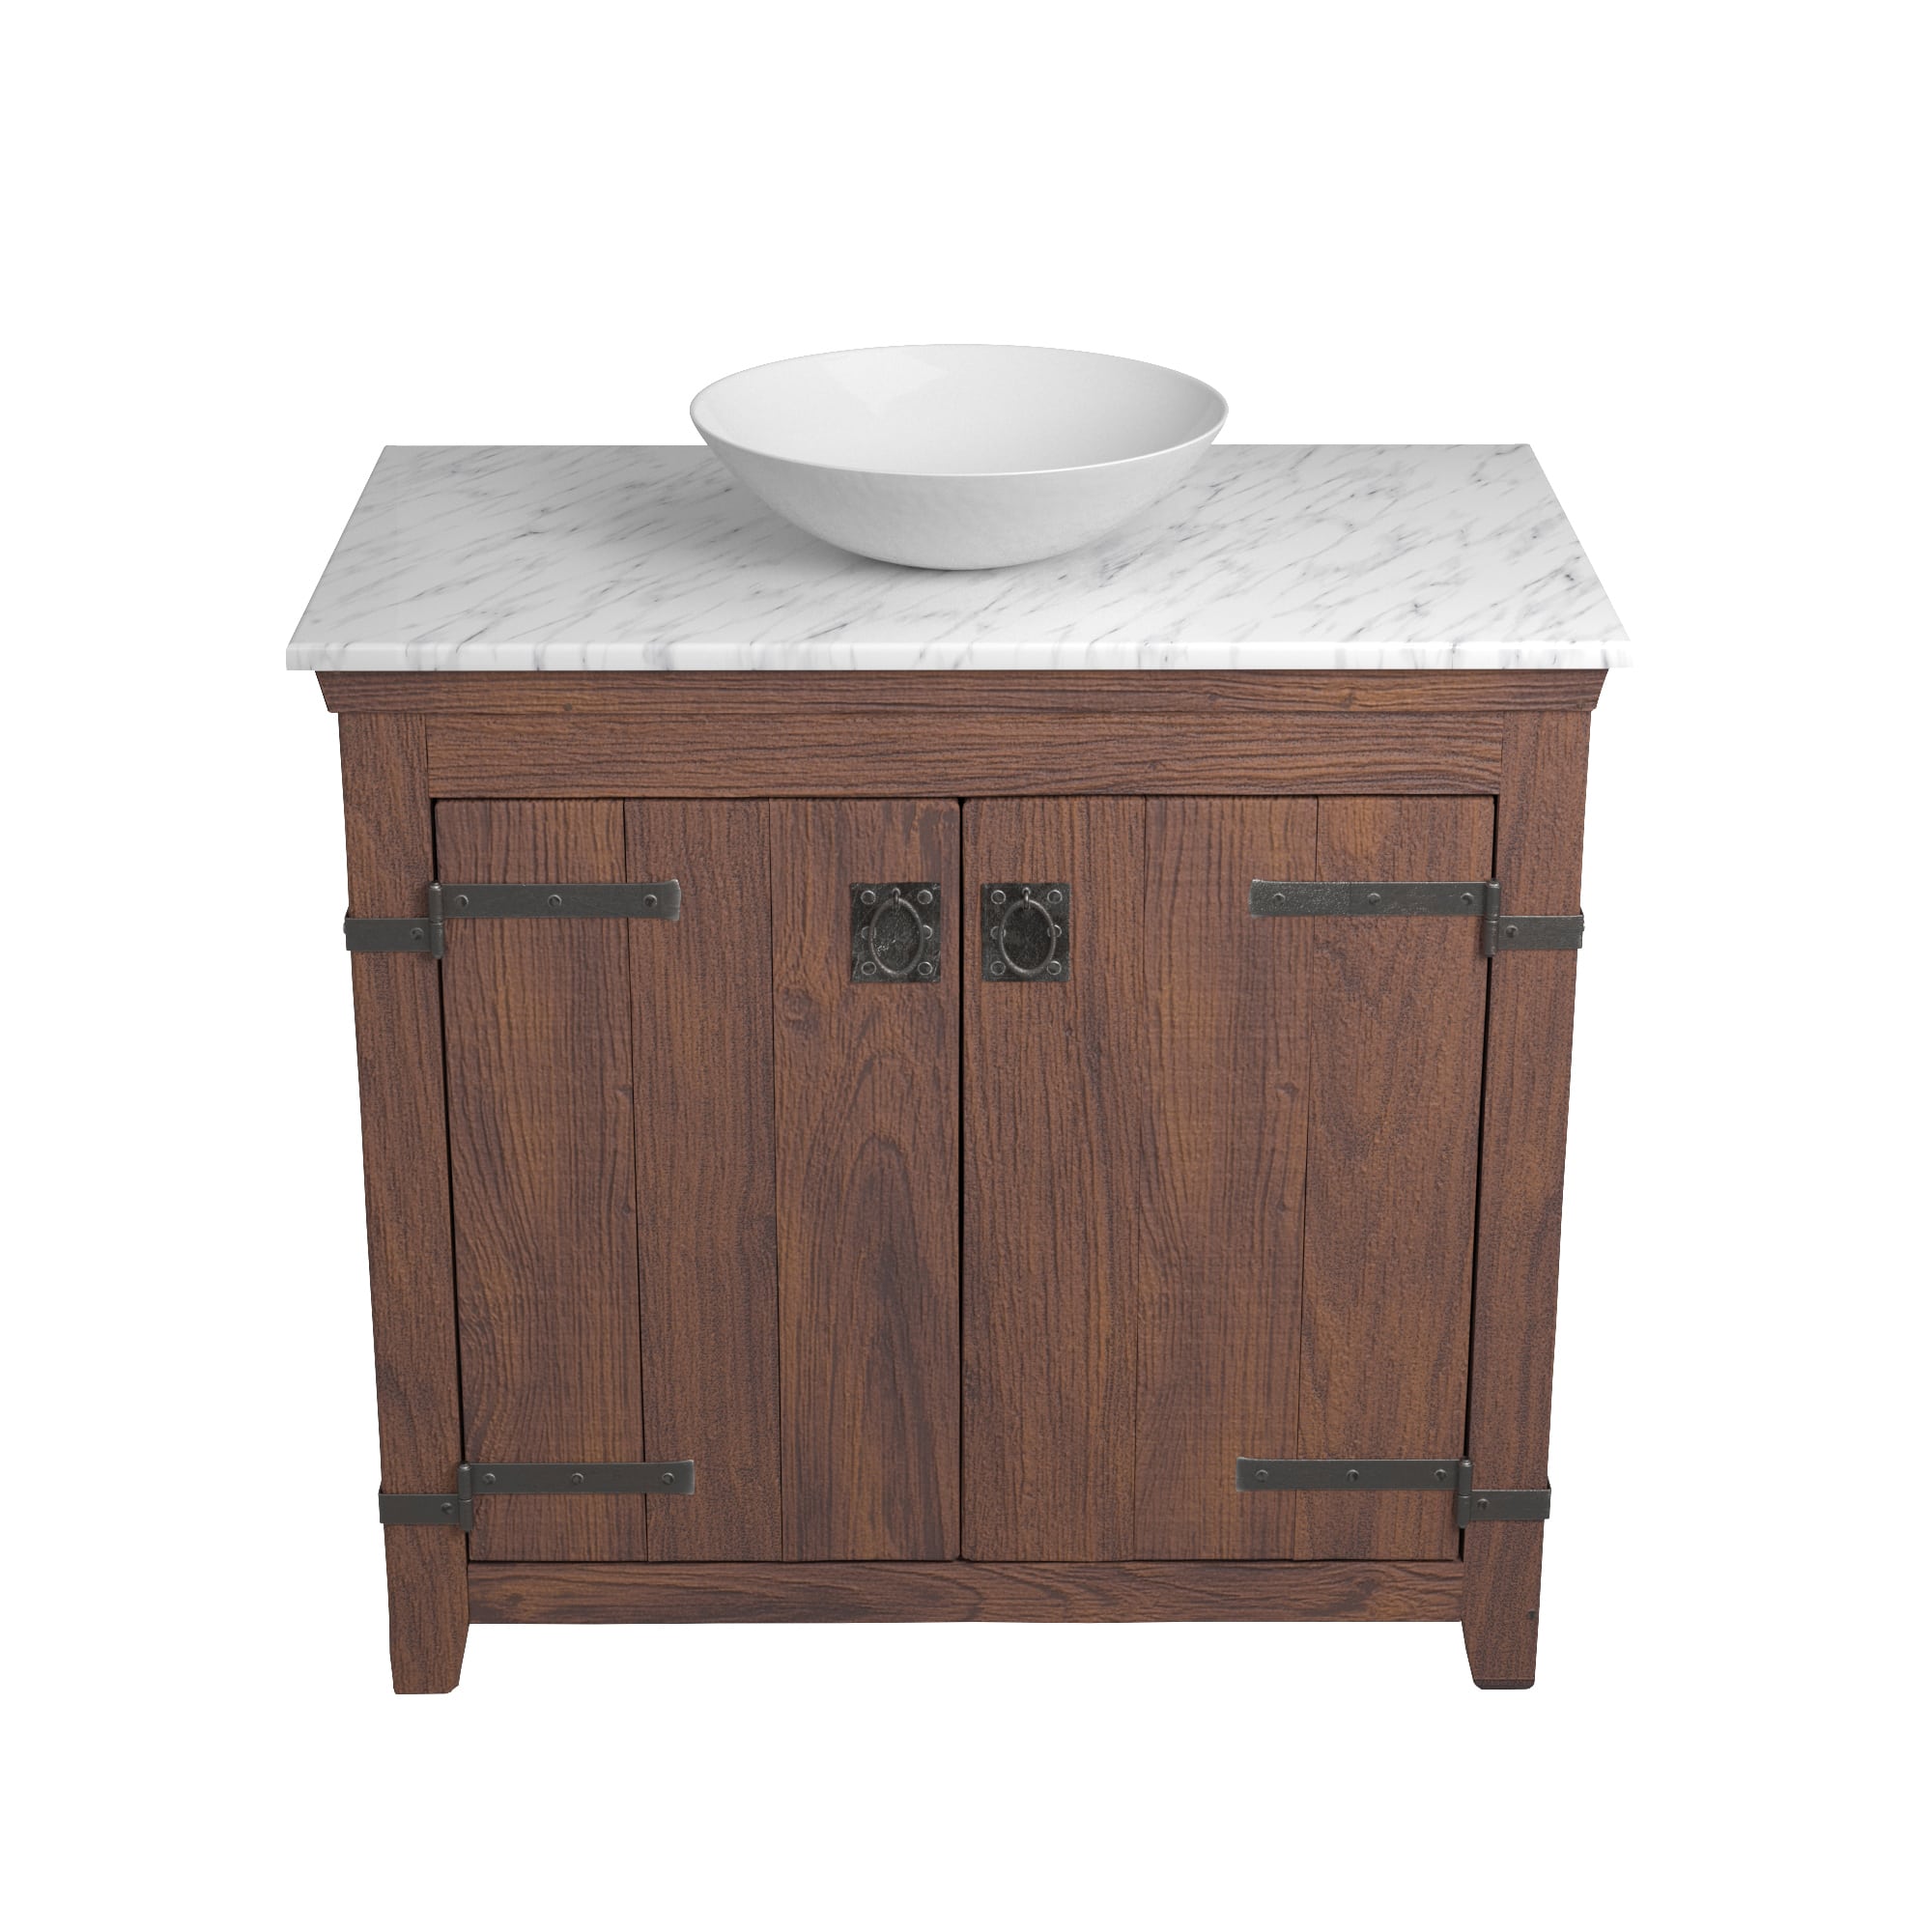 Native Trails 36" Americana Vanity in Chestnut with Carrara Marble Top and Verona in Bianco, No Faucet Hole, BND36-VB-CT-MG-076